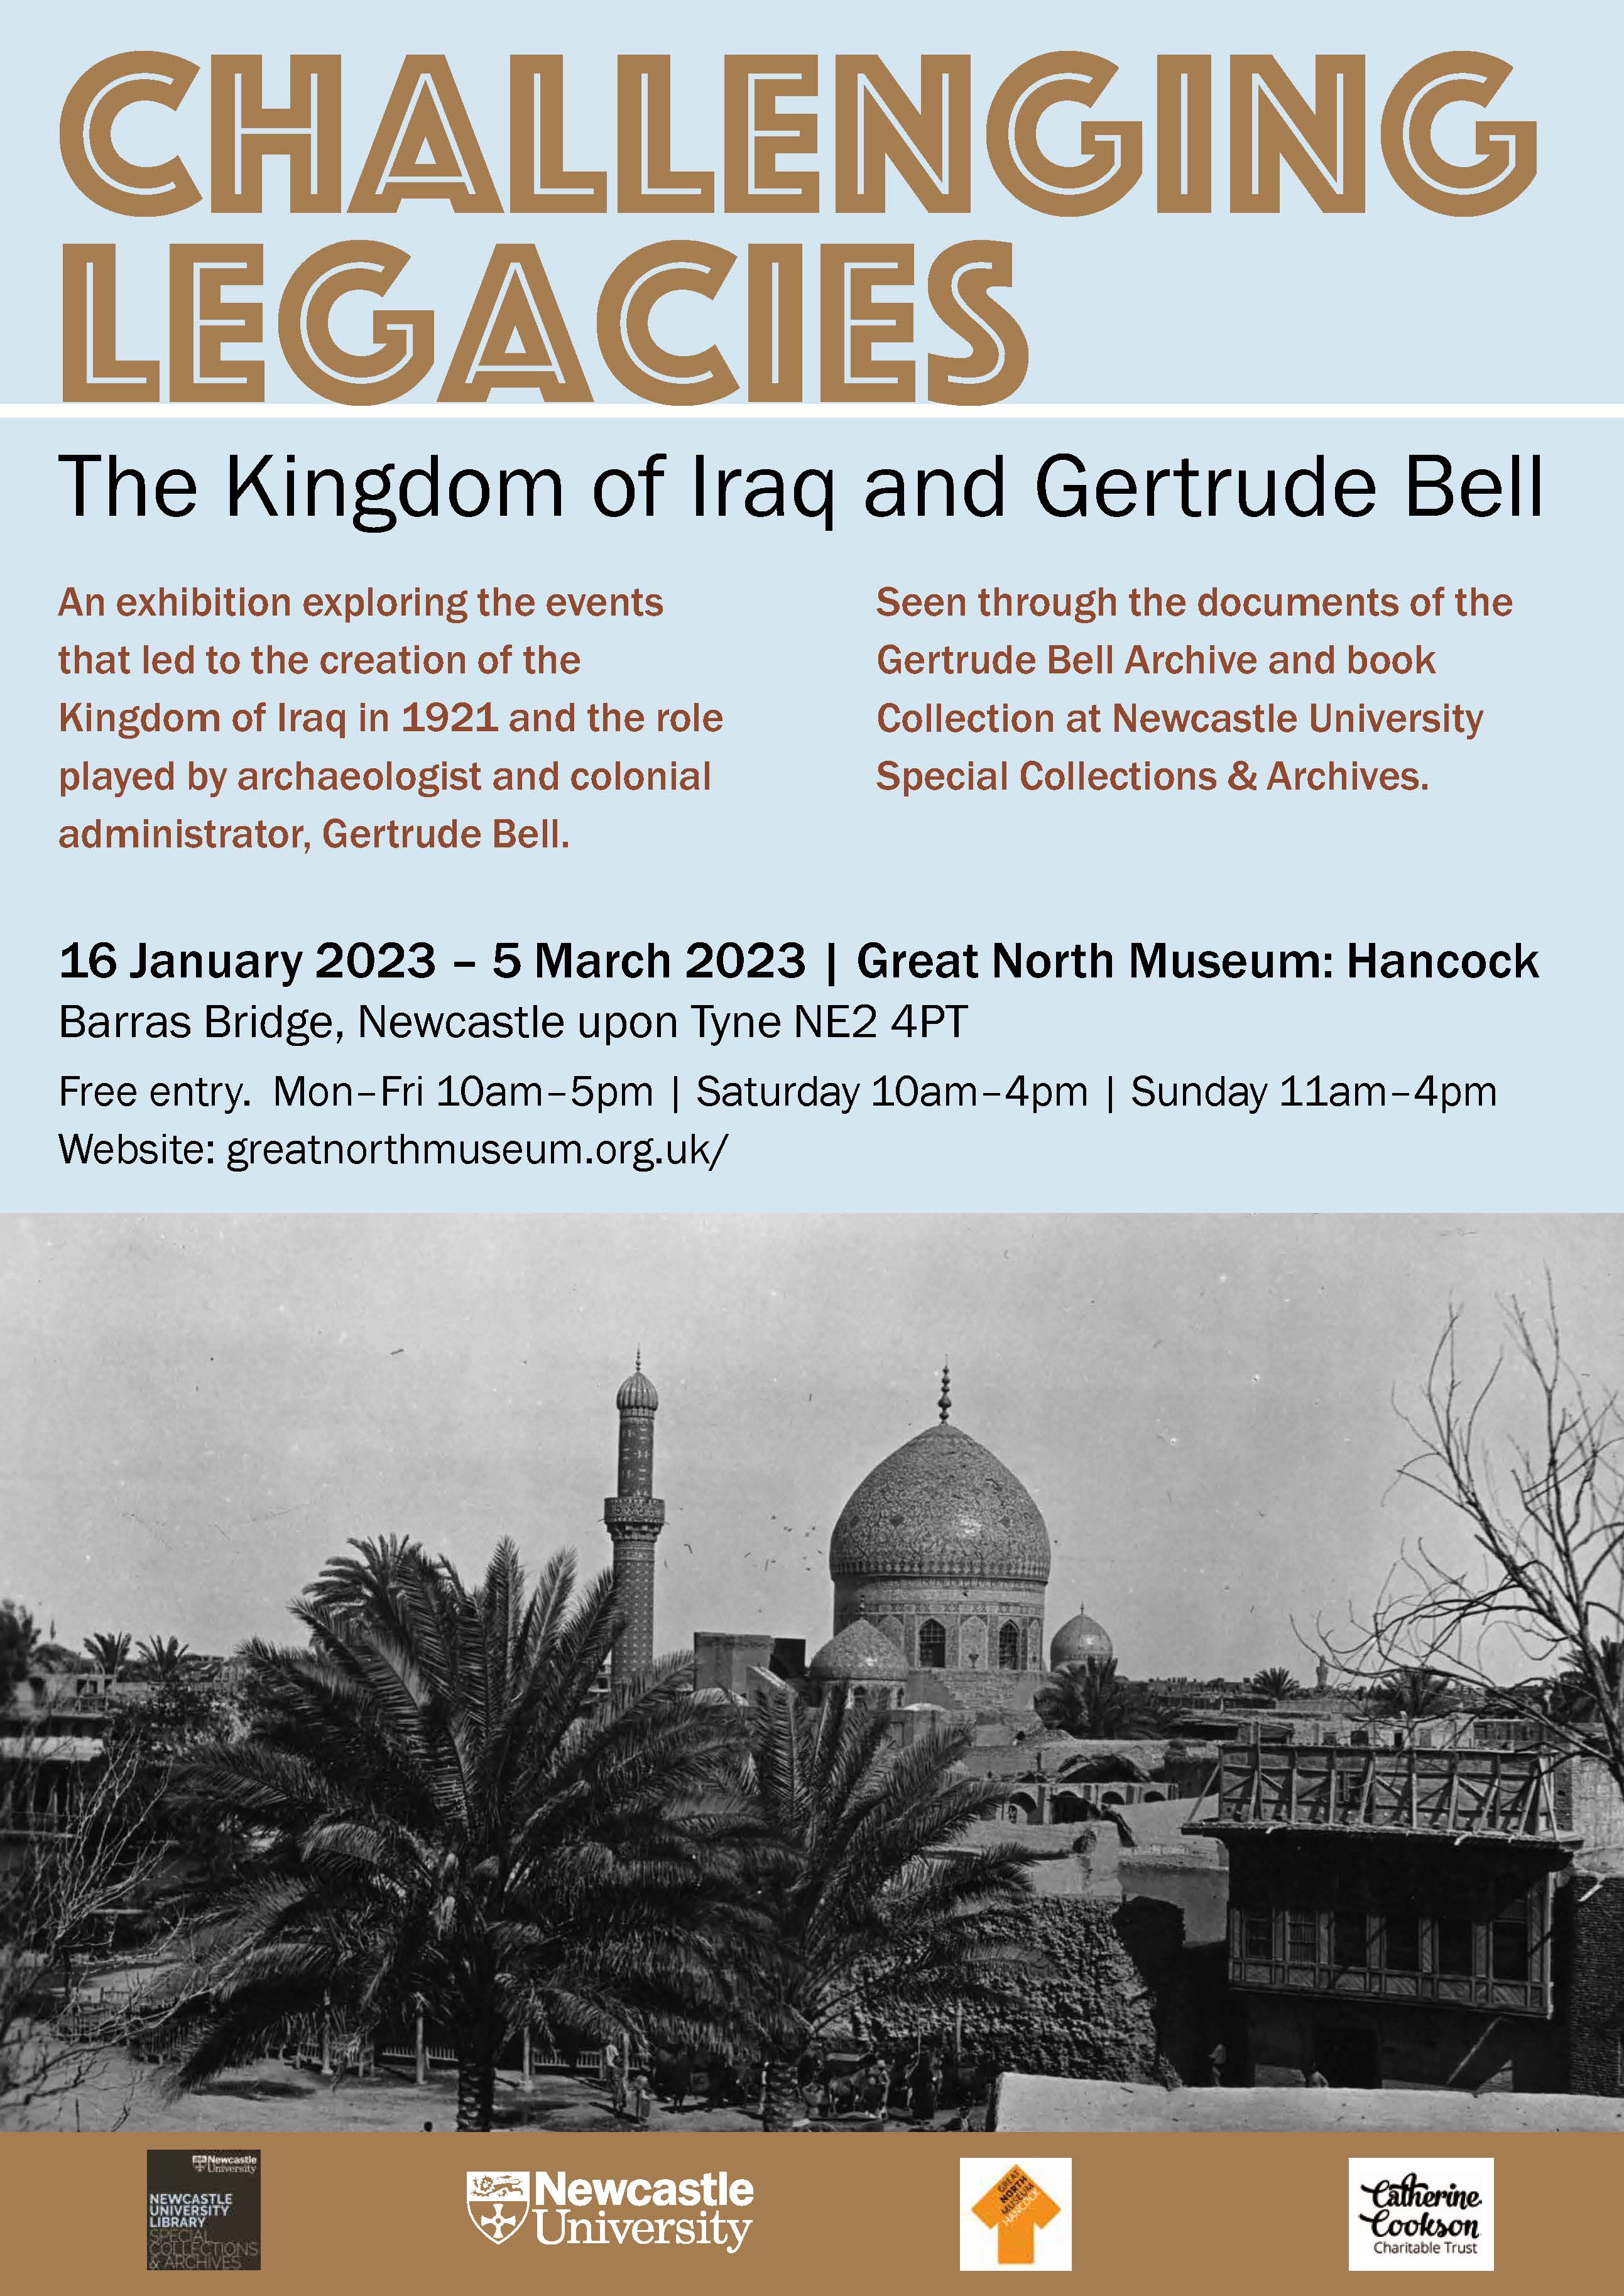 Challenging Legacies: The Kingdome of Iraq and Gertrude Bell exhibition poster: title at the top, followed by text of the opening times, location and brief description of the exhibition, then a black and white photograph underneath of palm trees in the foreground and the tops of a mosque in the background